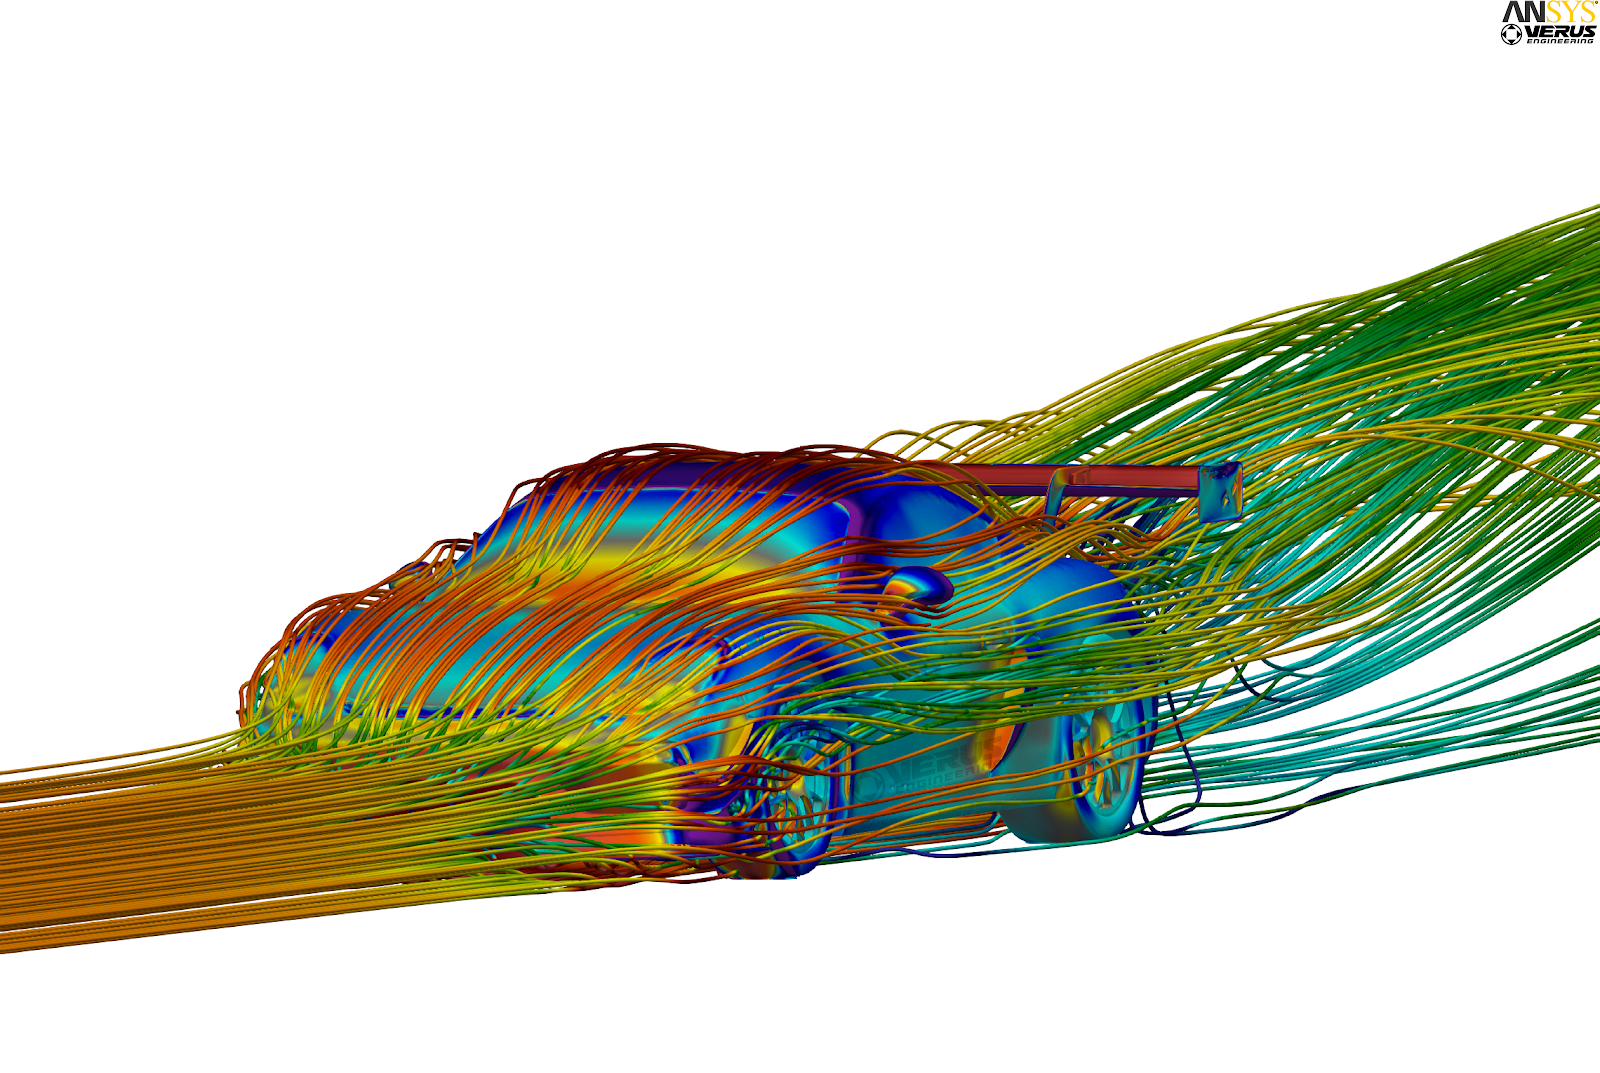 Image of Porsche 981 produced from computational fluid dynamics (CFD) software